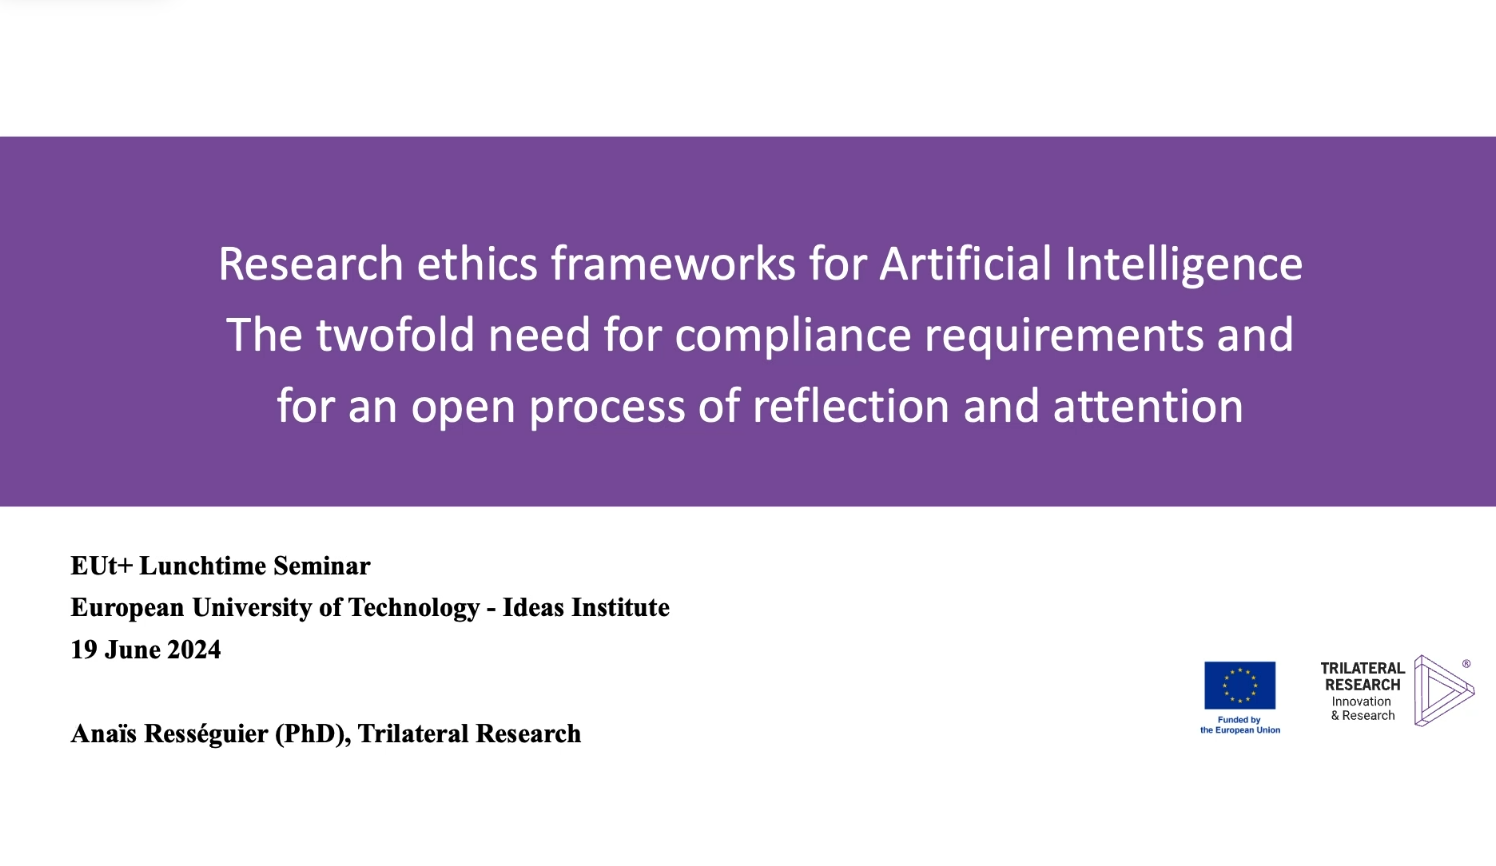 EUt+ Ideas Institute Hosts Seminar on AI Ethics and Research Compliance